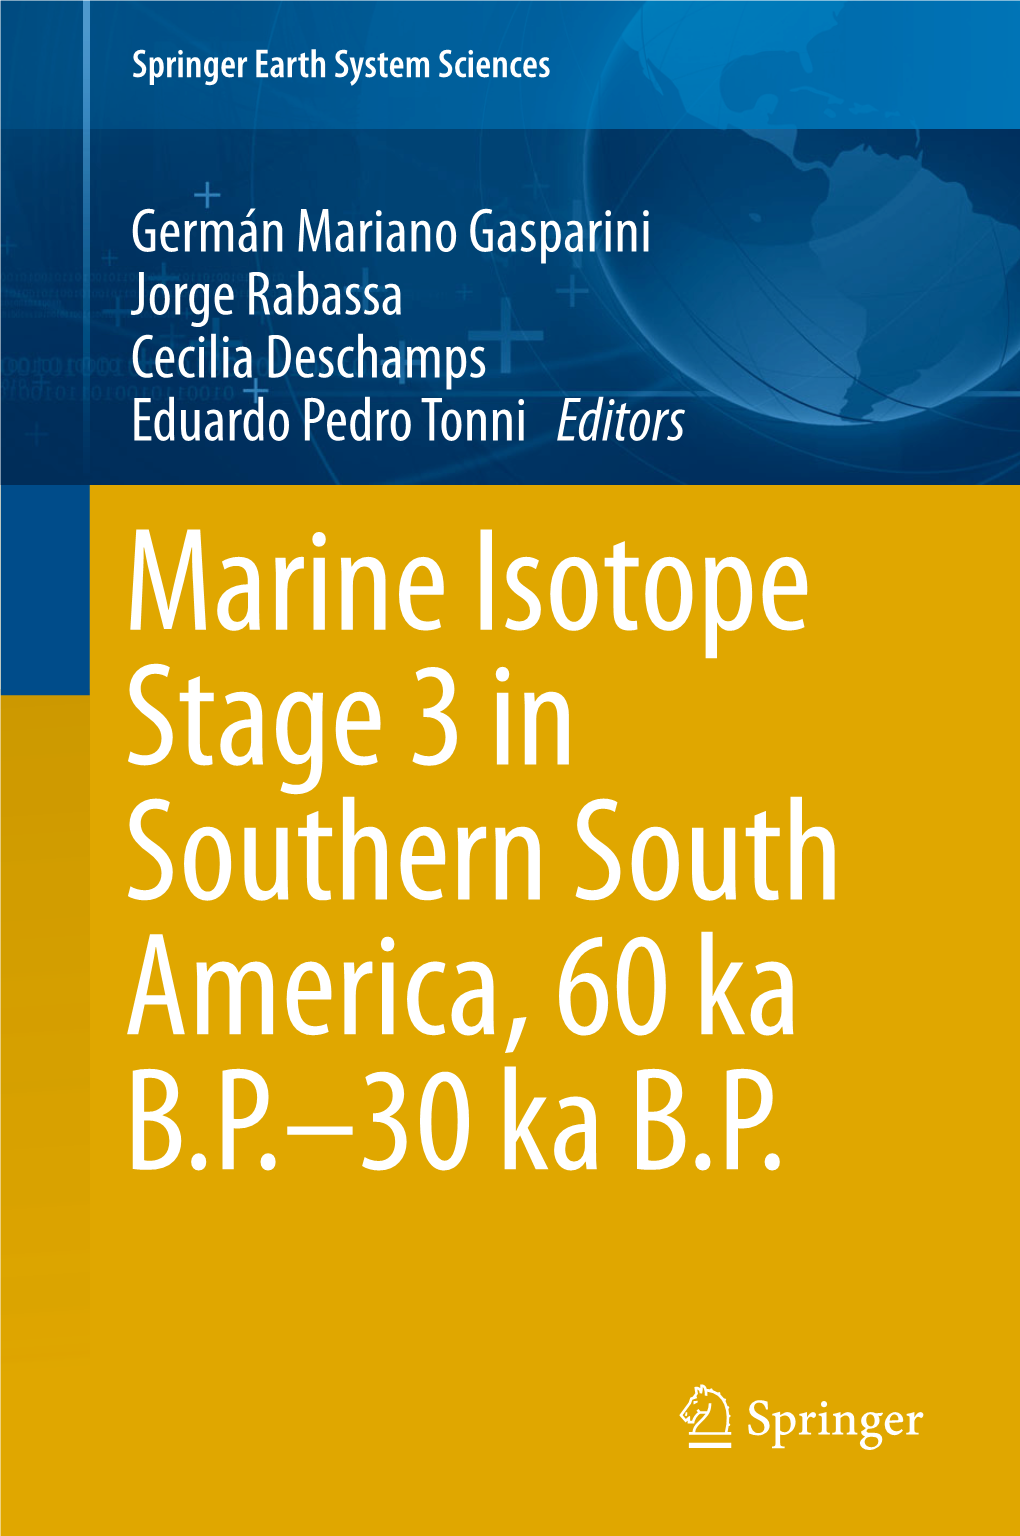 Marine Isotope Stage 3 in Southern South America, 60 Ka B.P.–30 Ka B.P. Springer Earth System Sciences